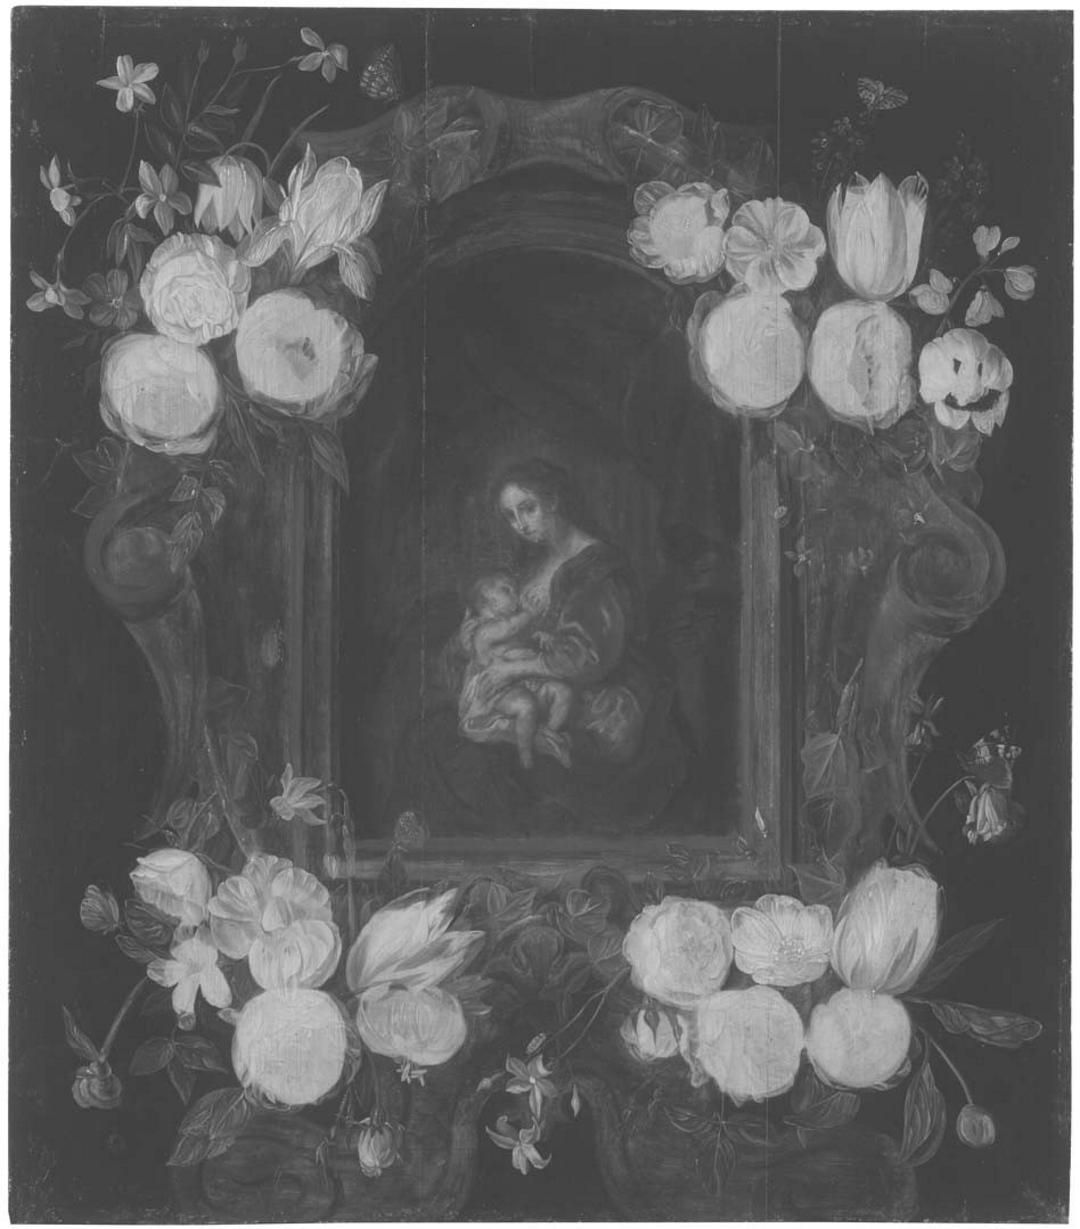 Slider: Near-infrared, Madonna and Child encircled by roses c.1650s